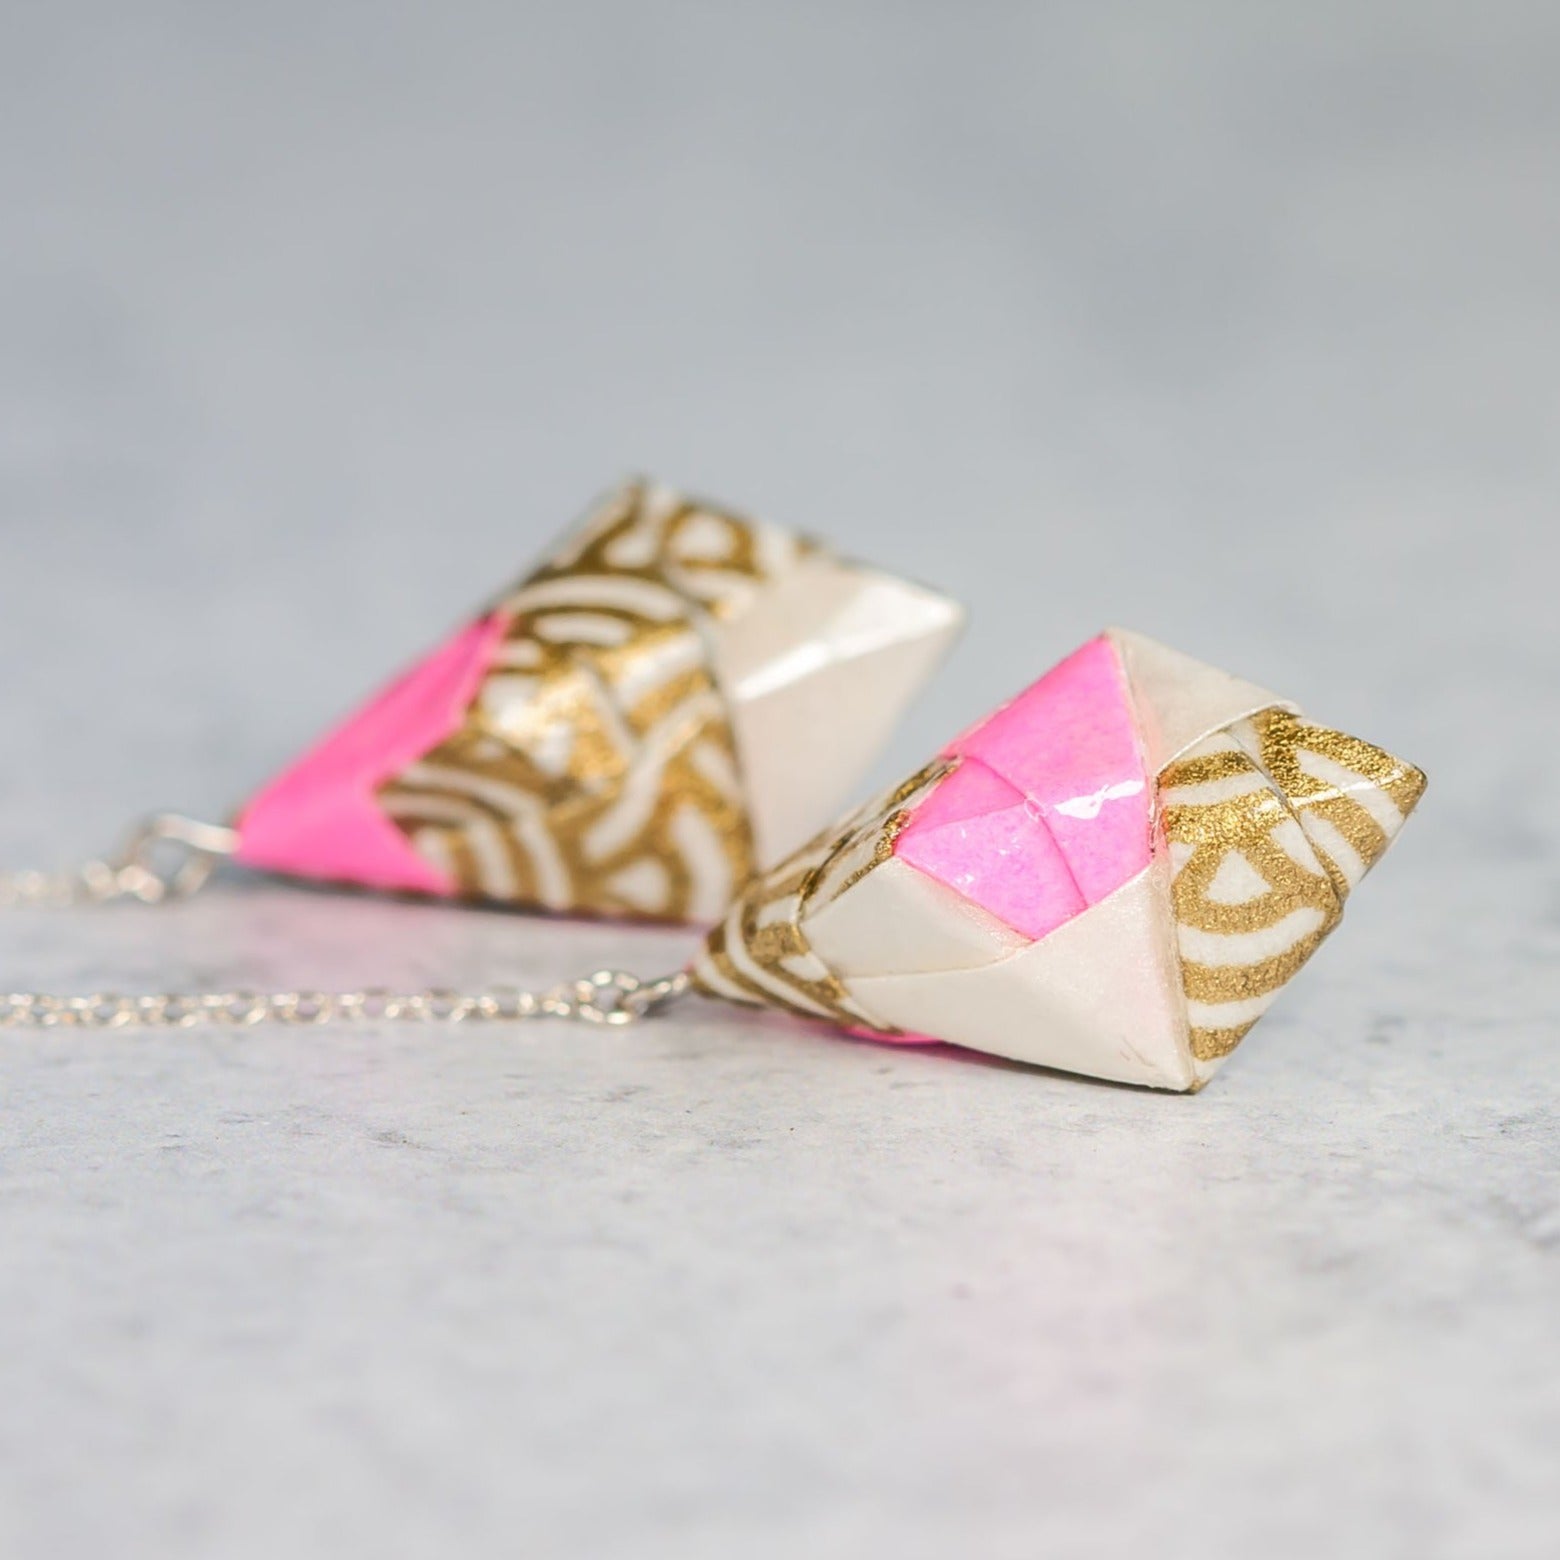 Origami Diamond Paper Earrings - Pink Gold White - By LeeMo Designs in Bend, Oregon